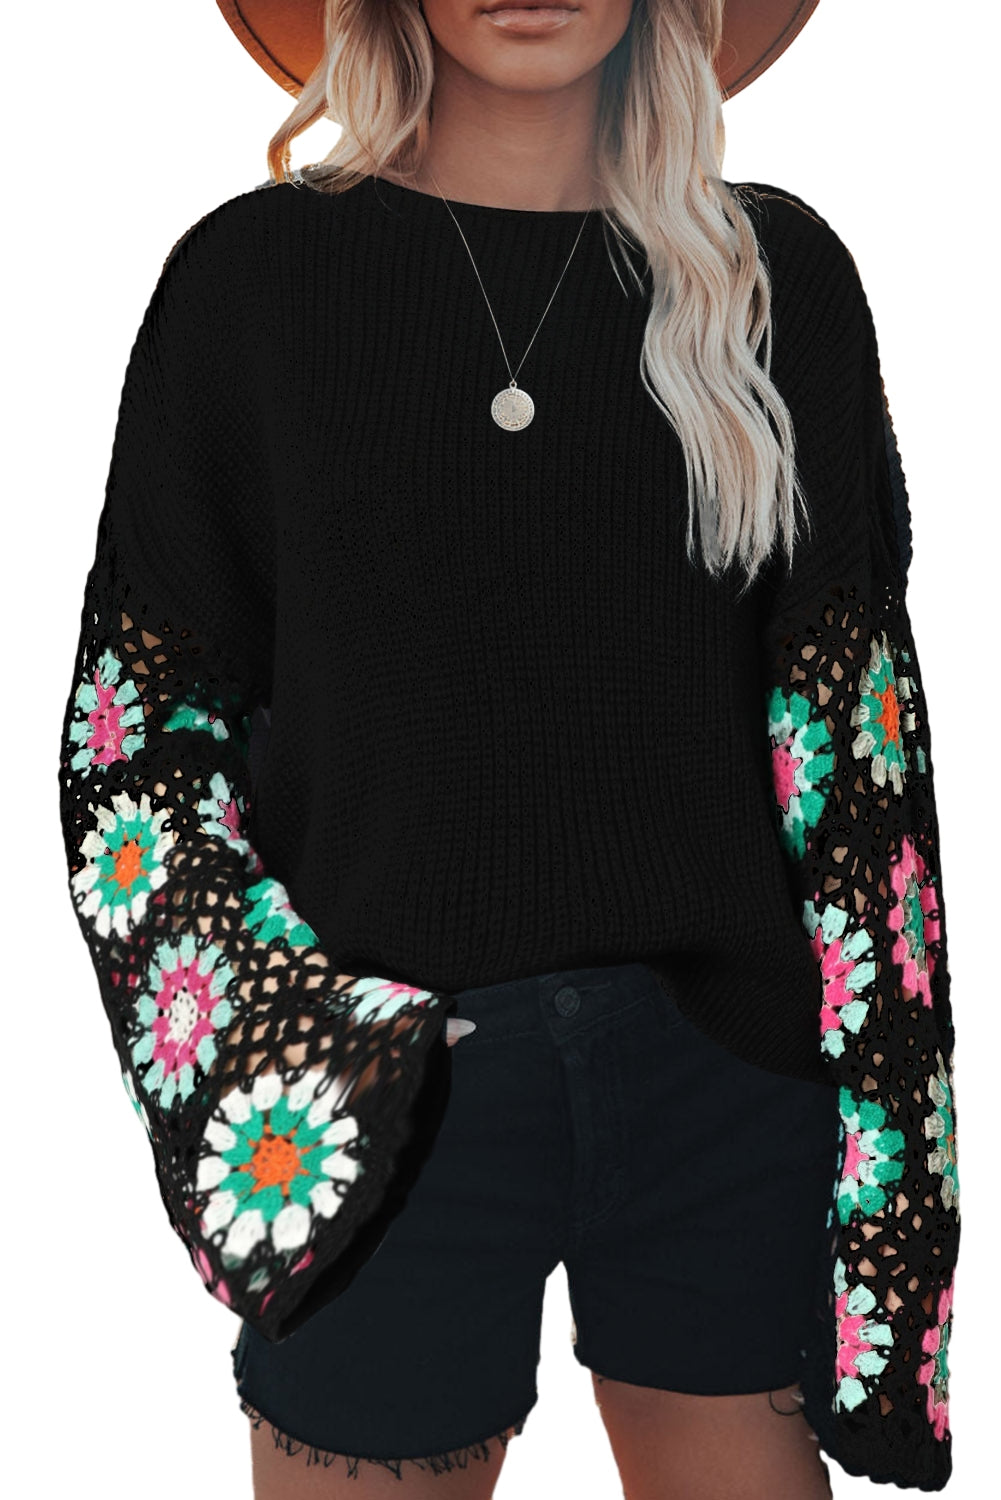 Ginger Plus Size Floral Crochet Sleeve Open Front Cardigan - women's cardigan at TFC&H Co.